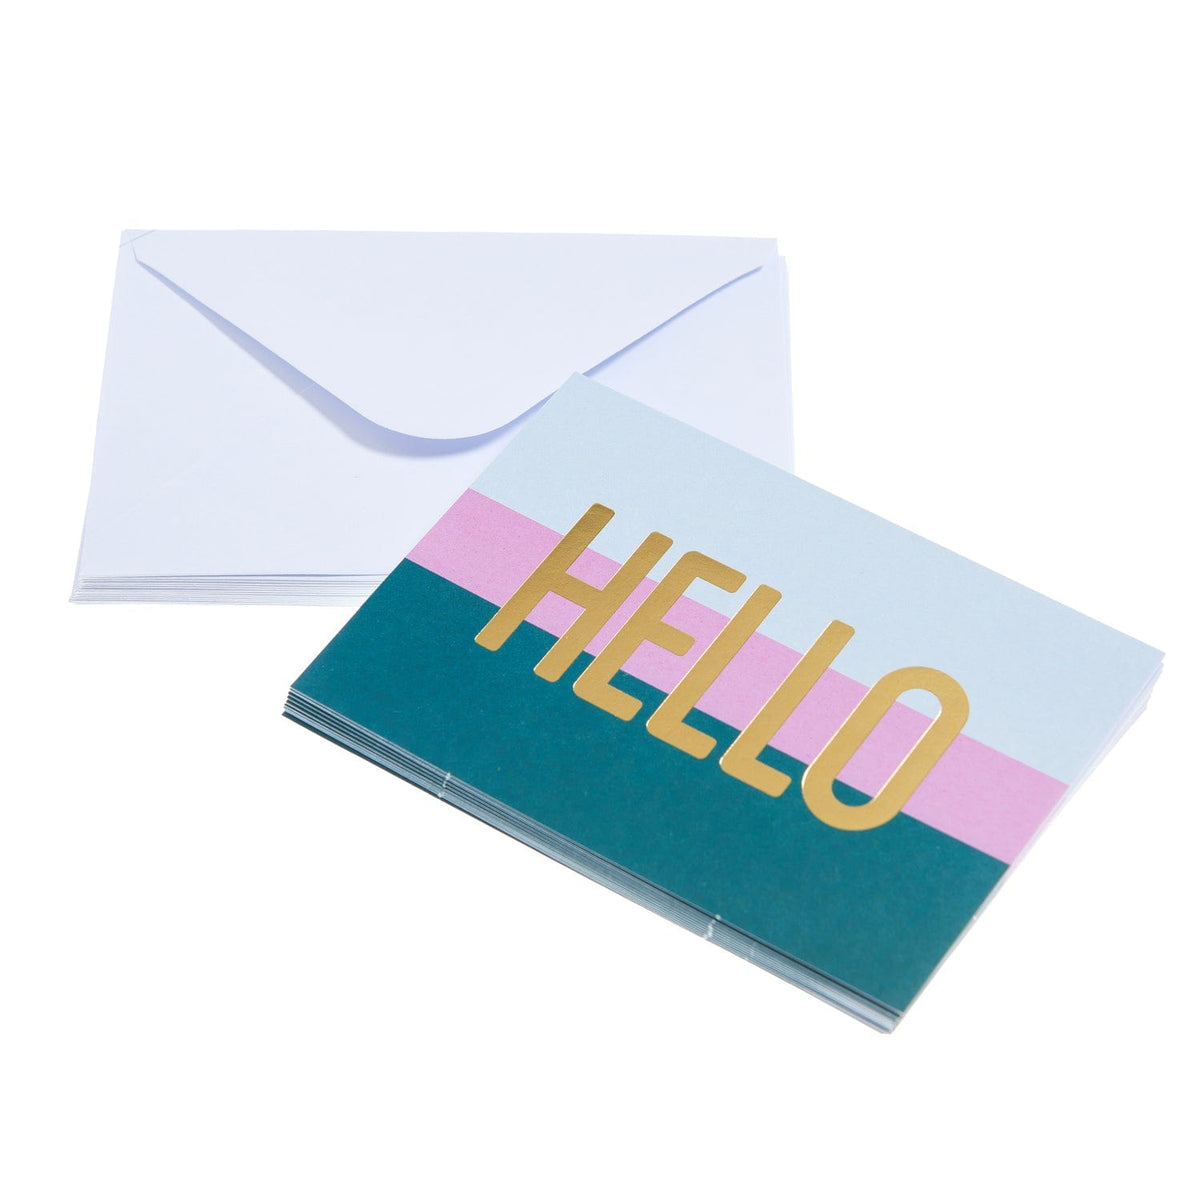 Hello Striped Notecards - 50 Count Gartner Studios Cards - Thank You 60241